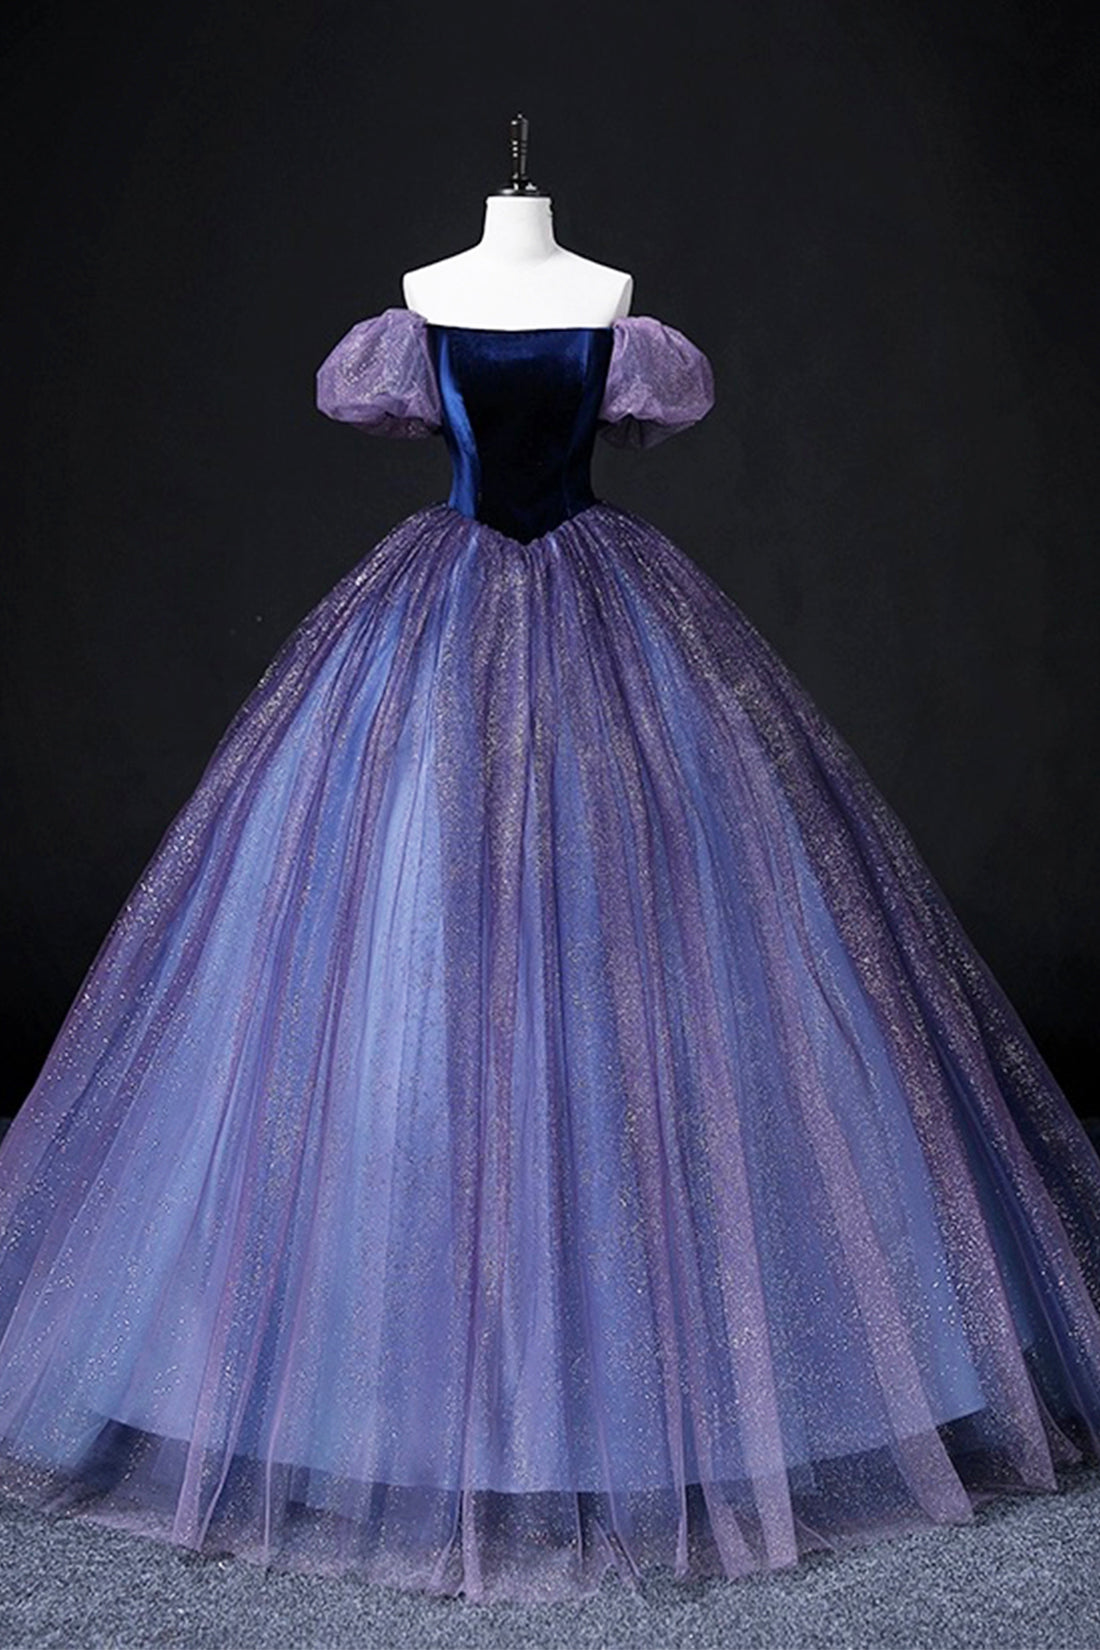 Lovely Velvet Tulle Long Prom Dress, Purple Off the Shoulder Evening Party Gown